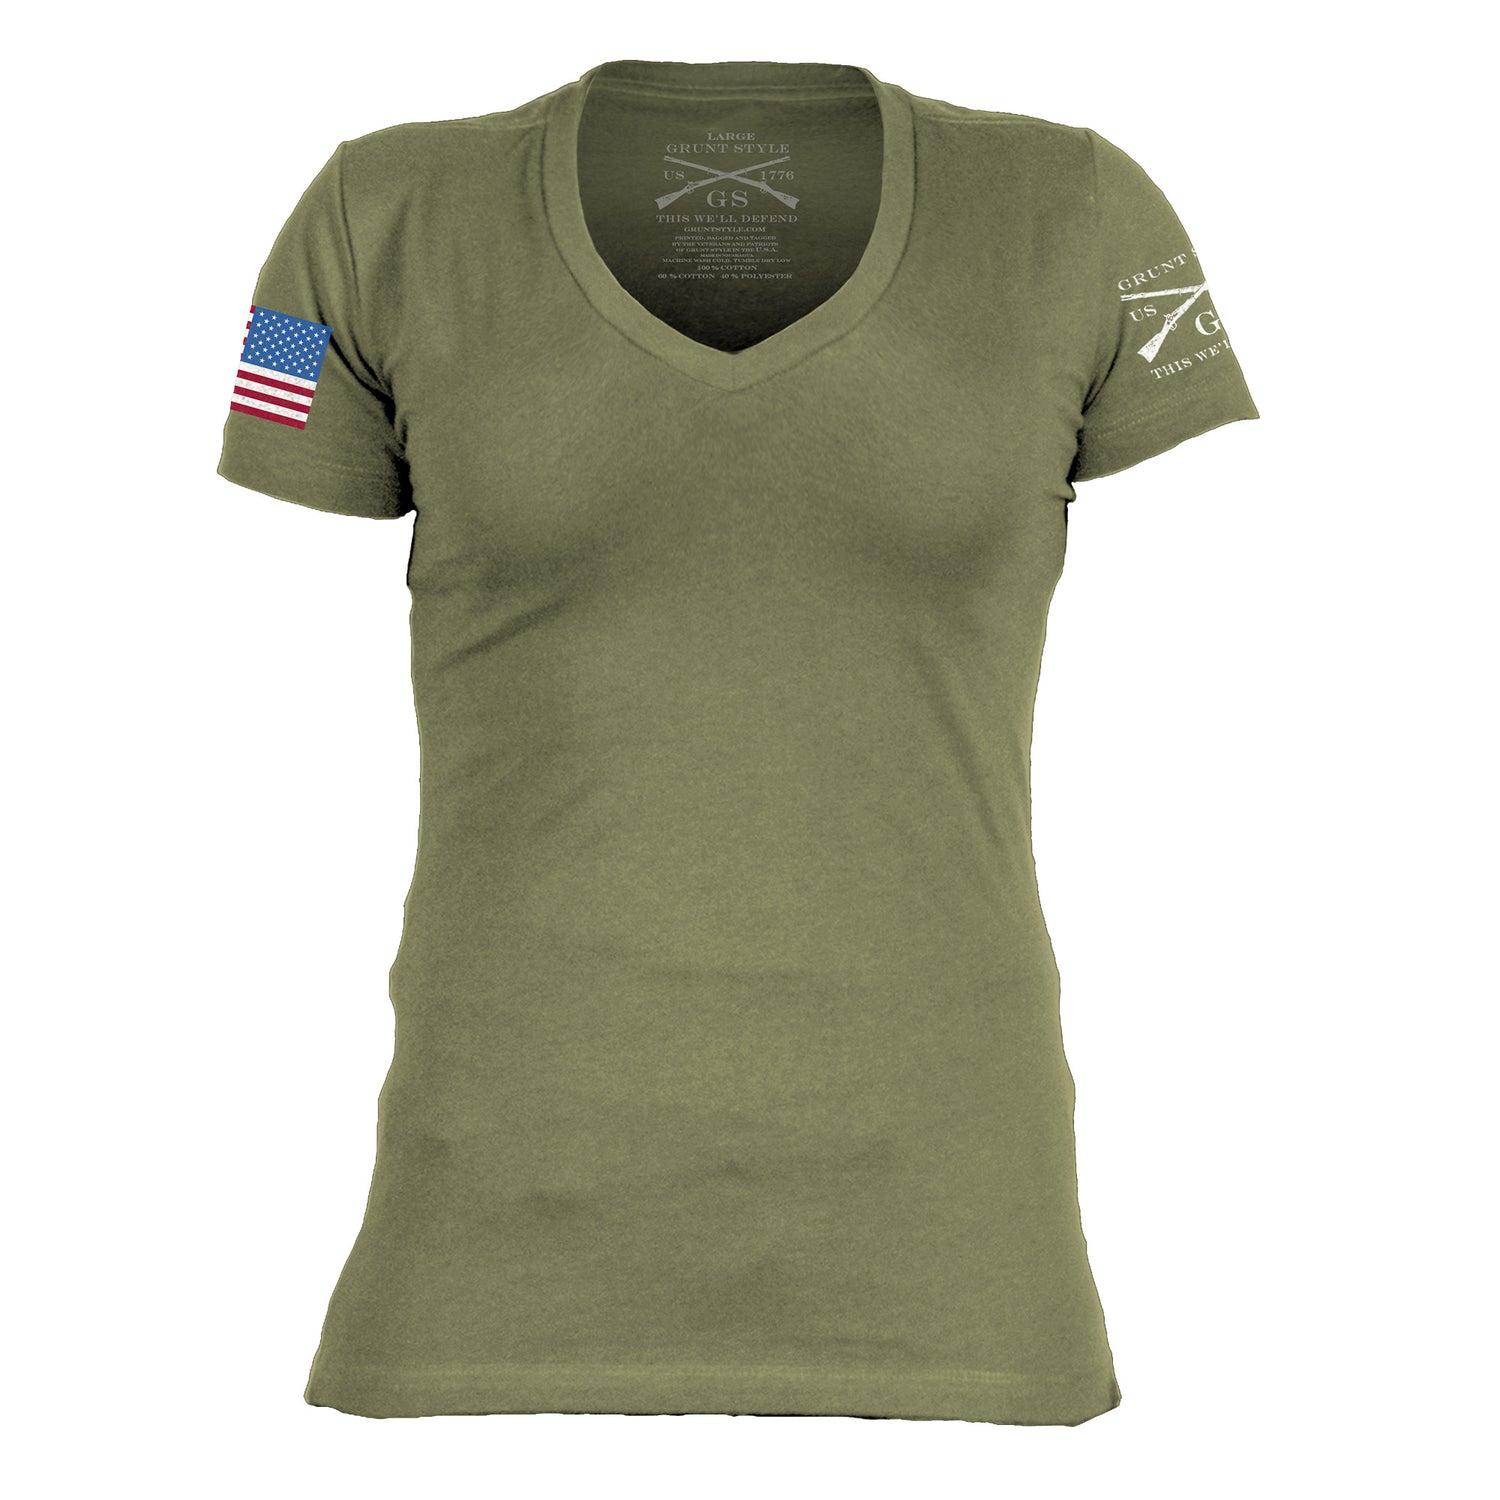 Patriotic Clothing for Women - 3 Pack T Shirts 